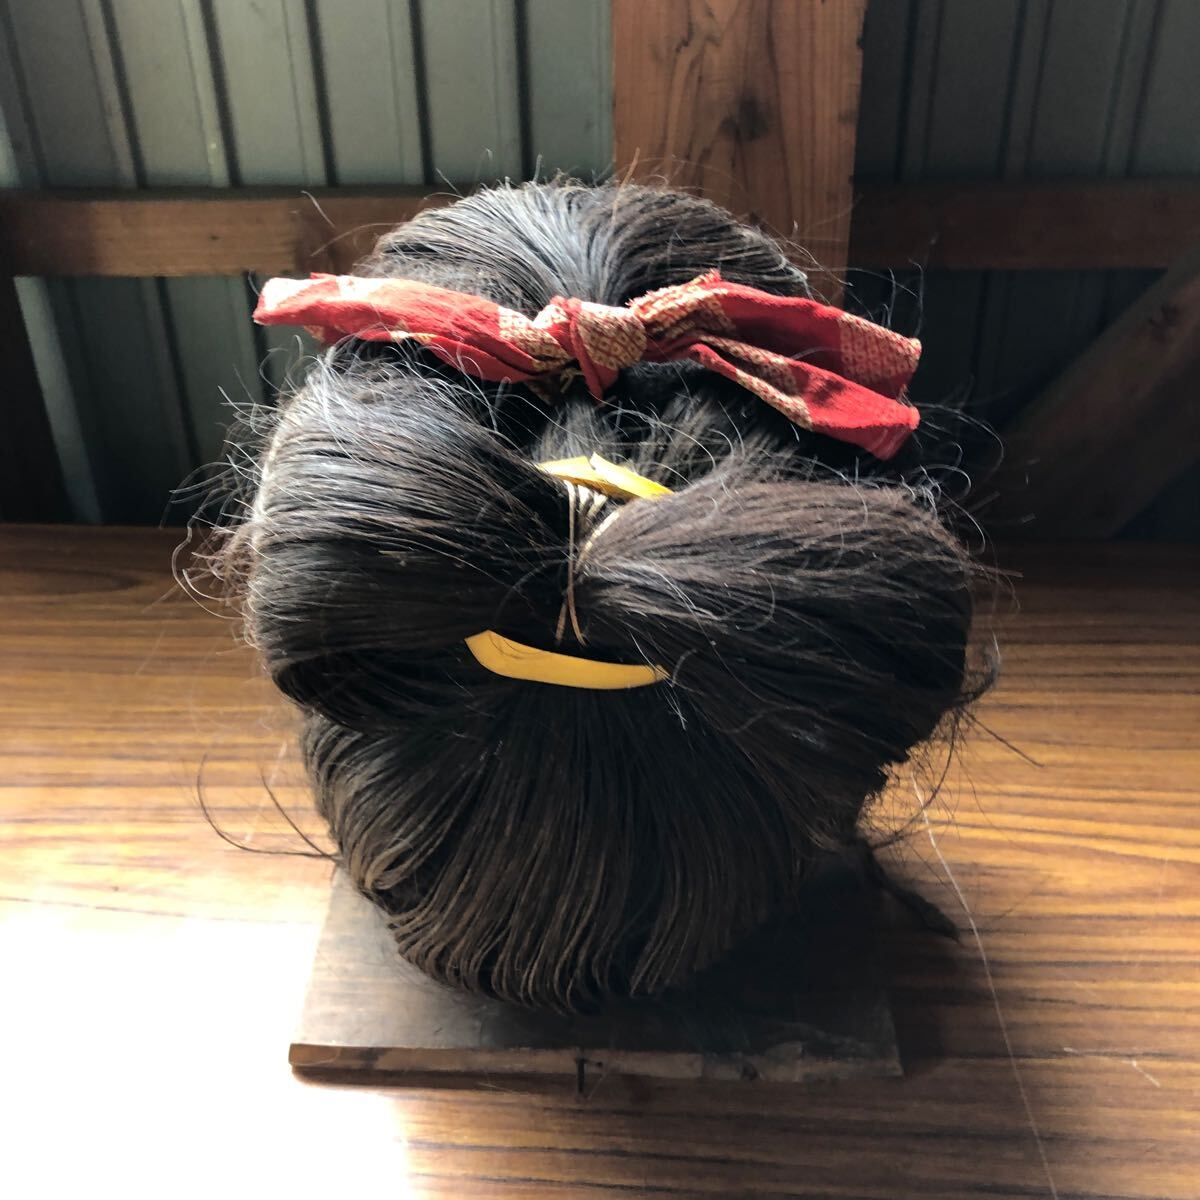  era large . play lawn grass . small shop Mai pcs Japanese coiffure old wig historical play Japanese clothes block .. rice field .. peach crack wig Event comedy festival .②